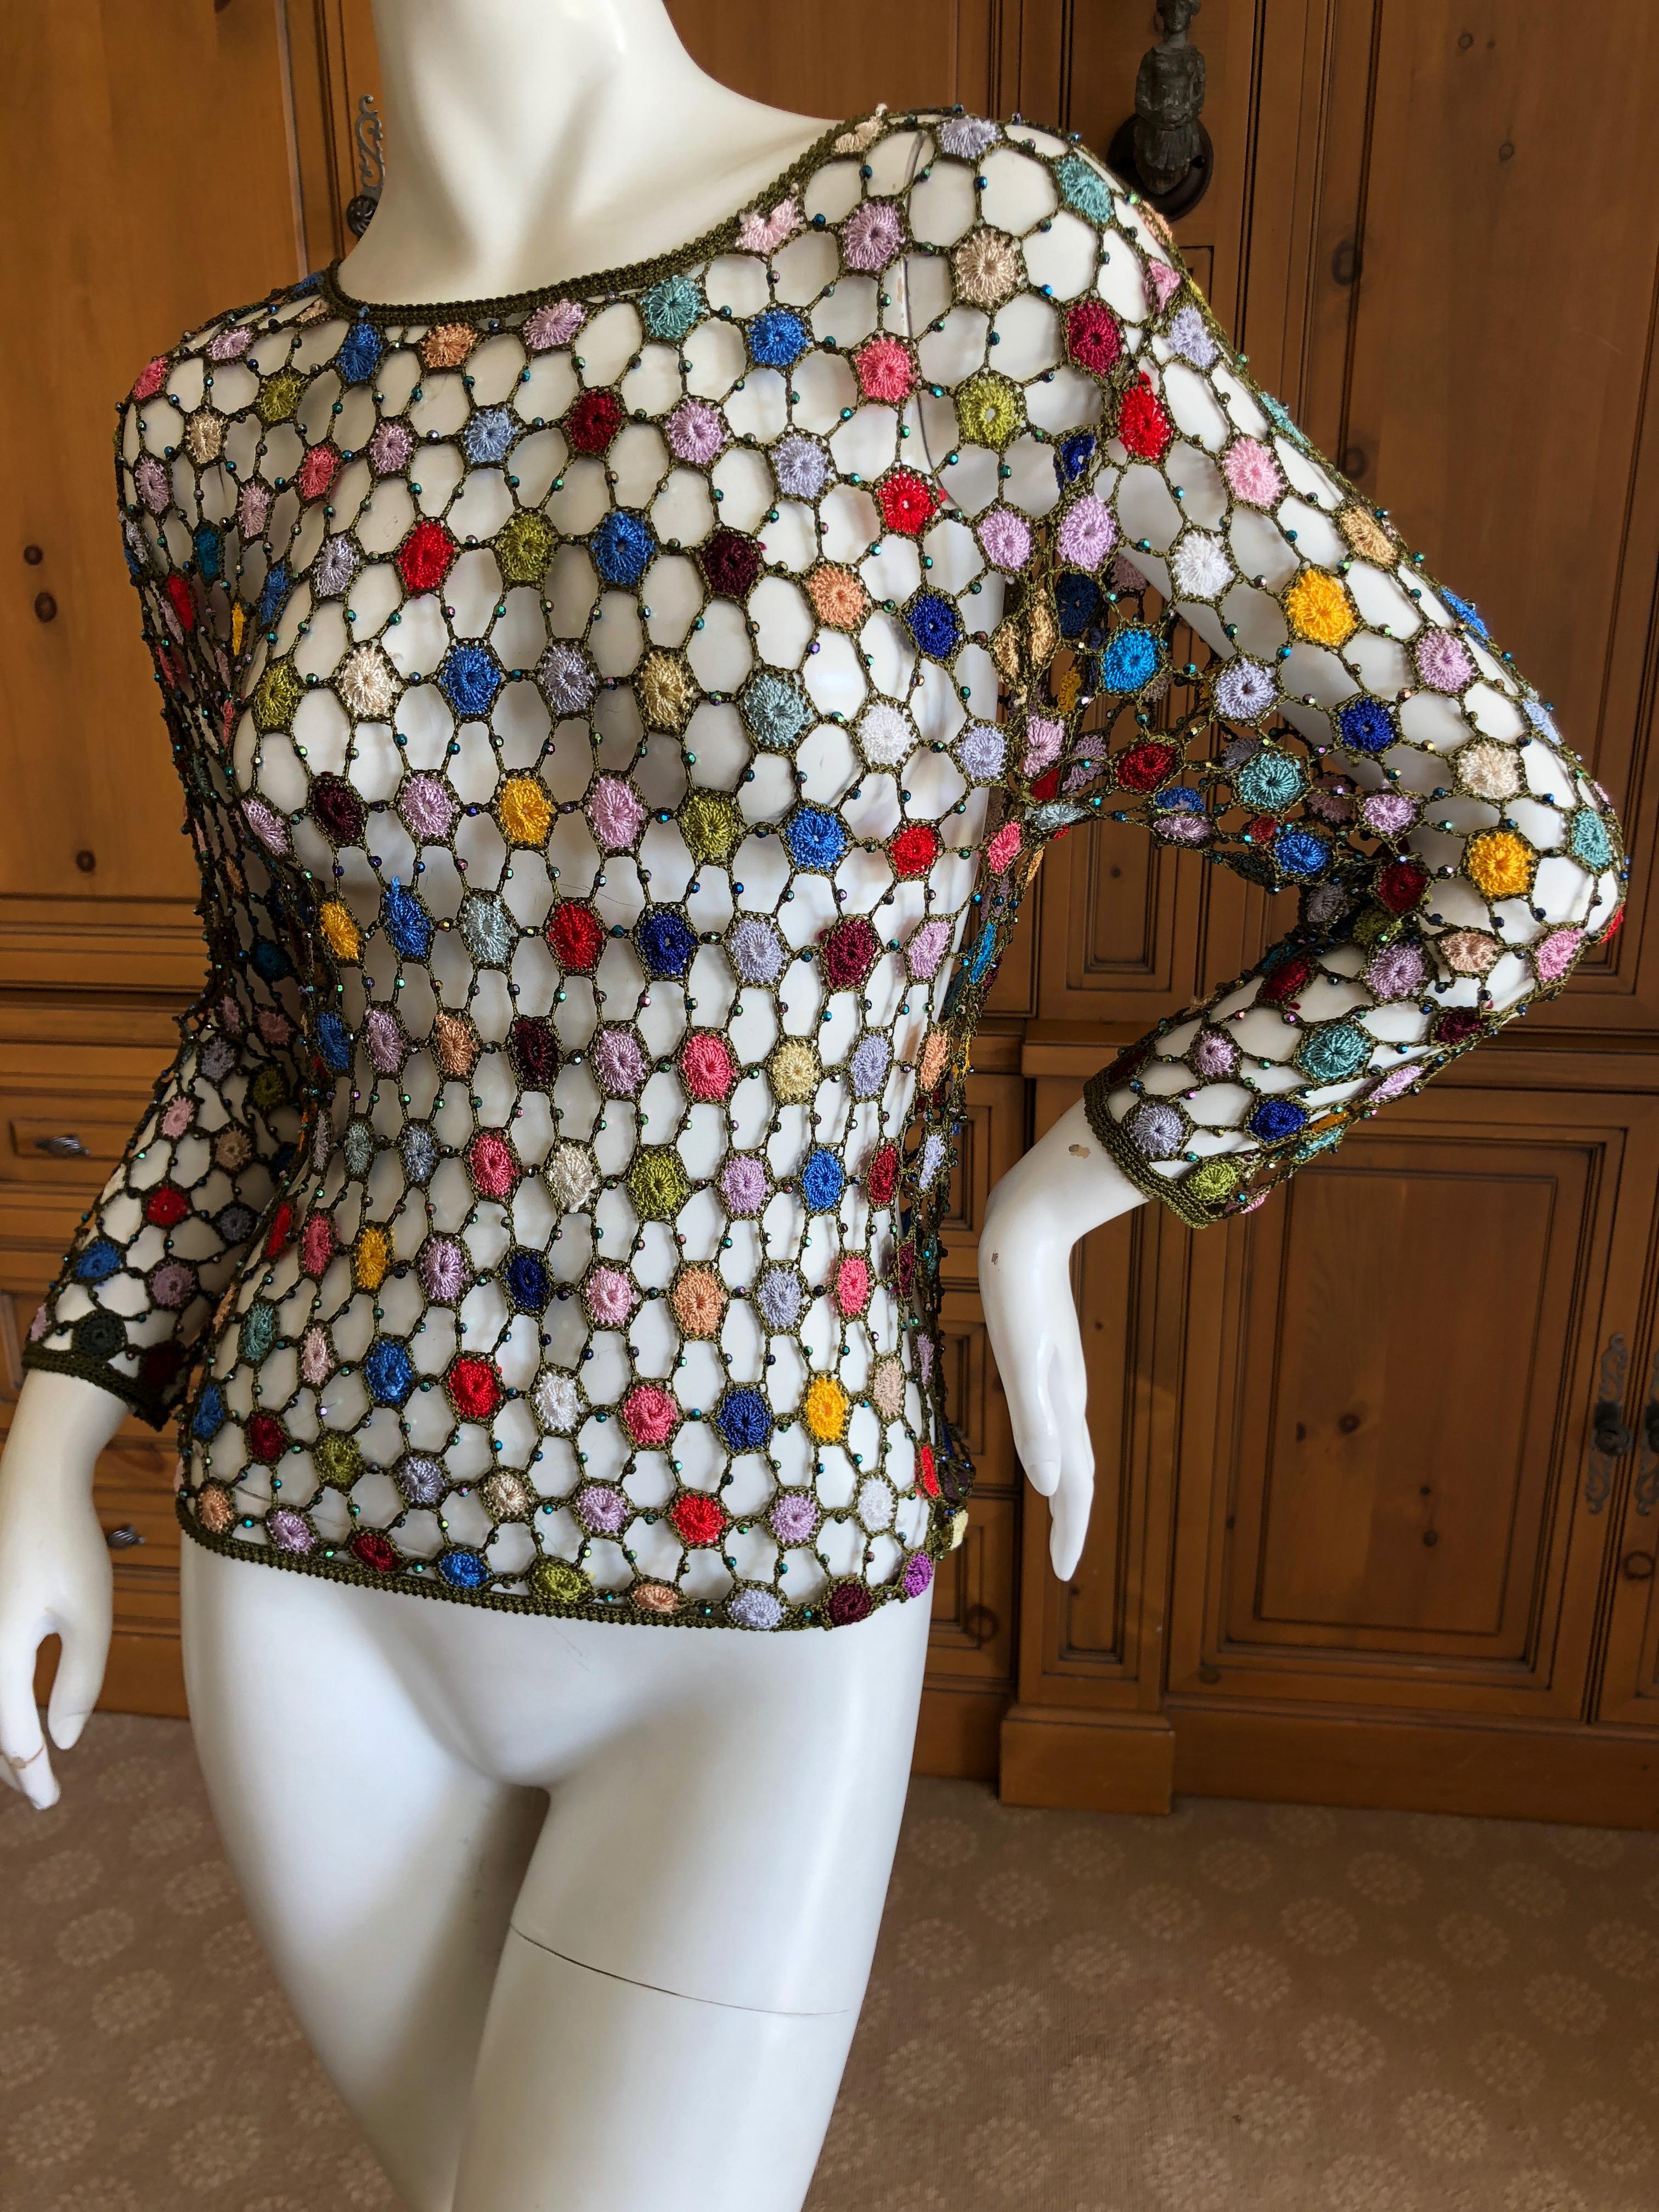 Gianni Versace Couture Vintage Crystal Bead Crochet Flower Sheer Long Sleeve Top.
Late eighties.
This is an amazing piece of handcrafted vintage treasure,  please use zoom feature to see details.
There is no size label Est .size 36
Bust 36